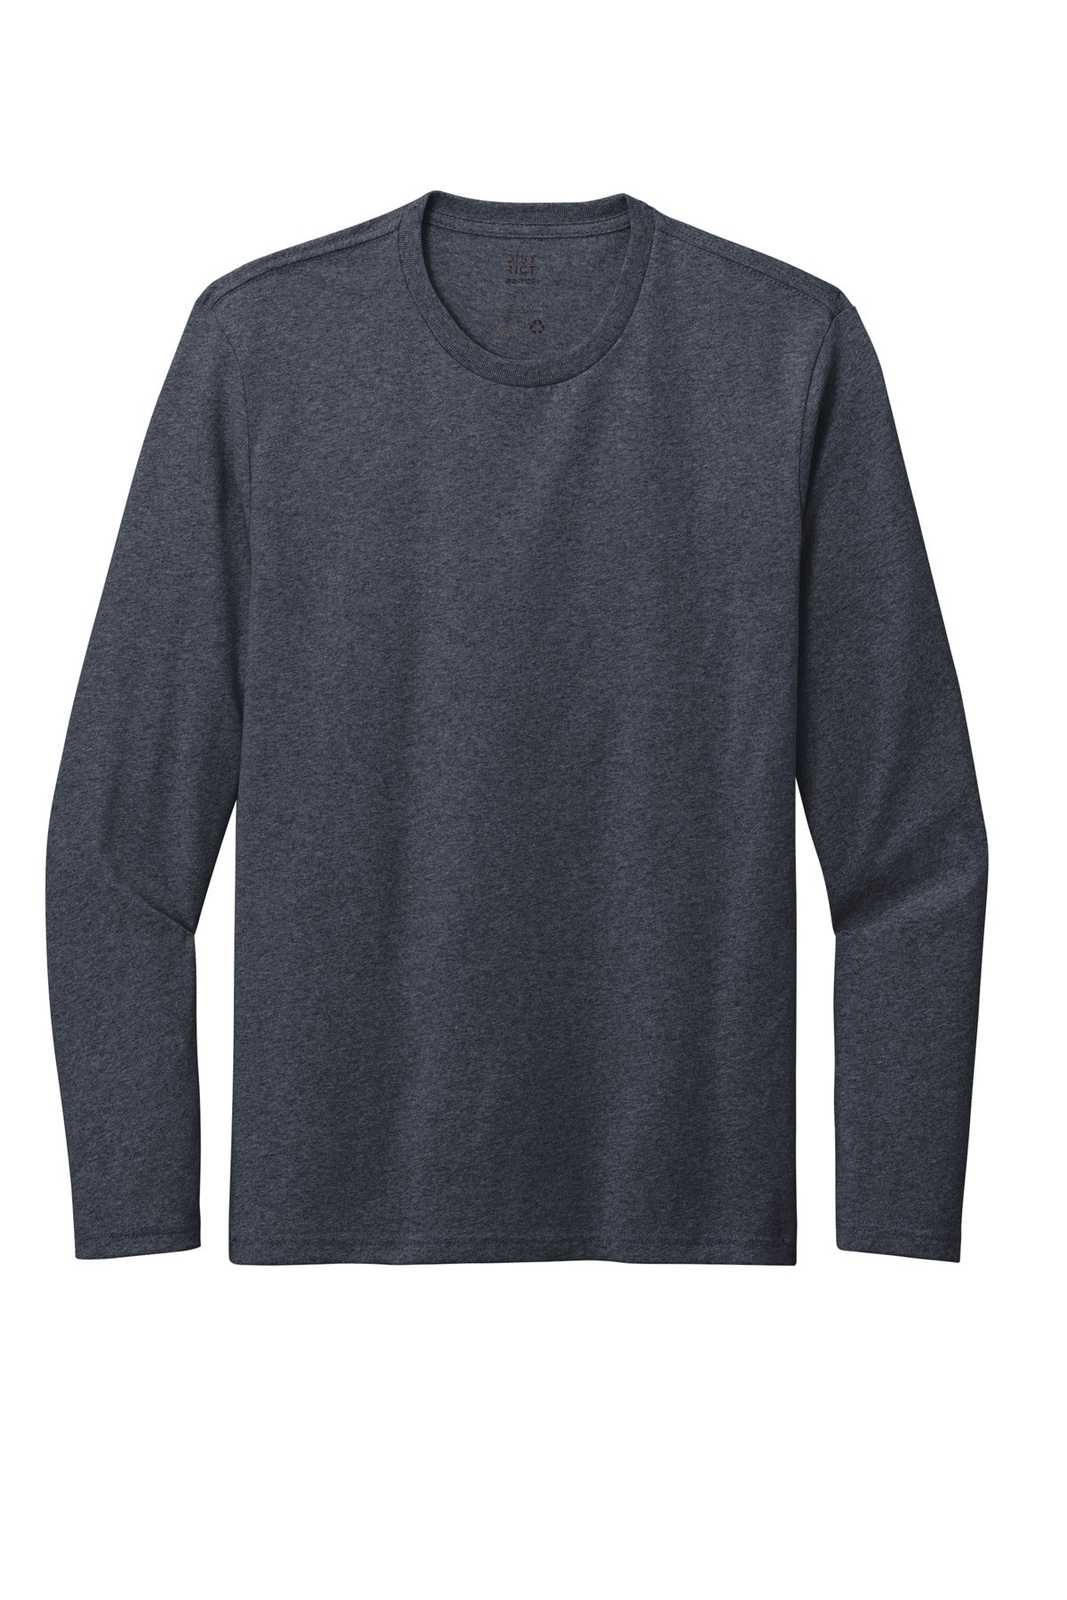 District DT8003 Re-Tee Long Sleeve - Heathered Navy - HIT a Double - 1